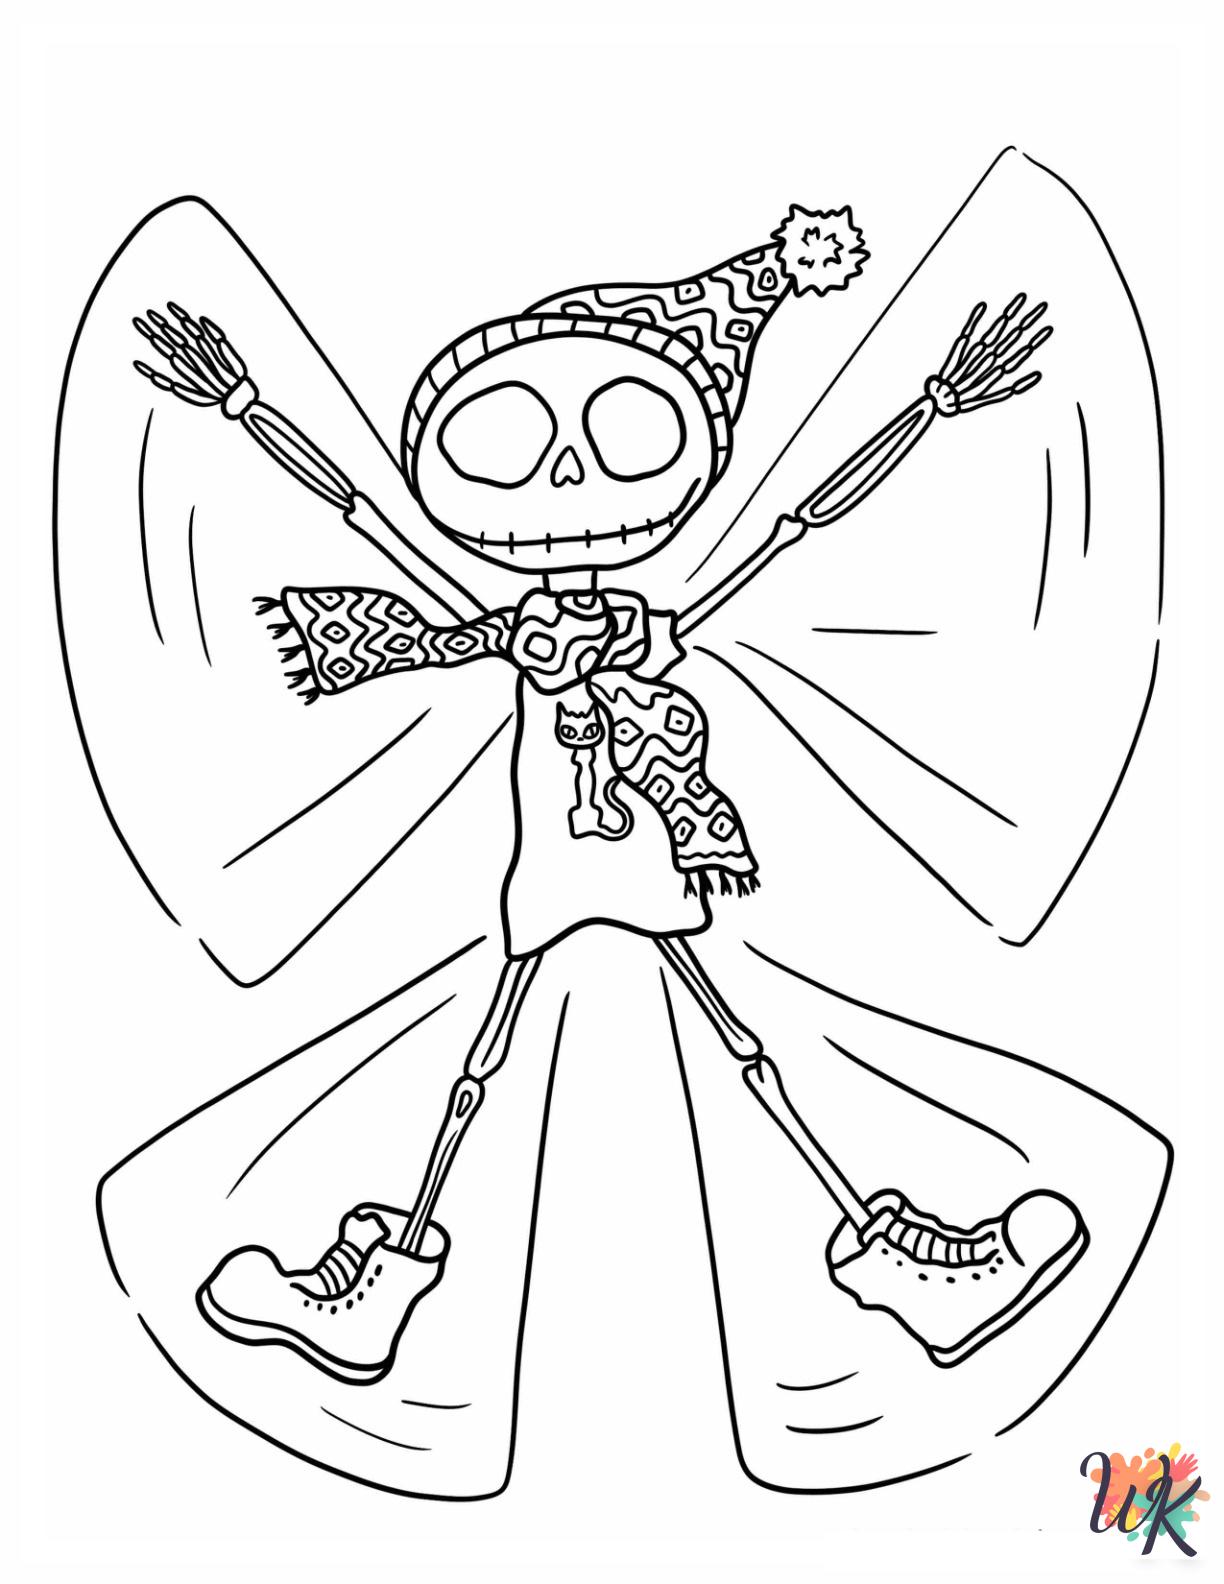 Skeleton Coloring Pages 15